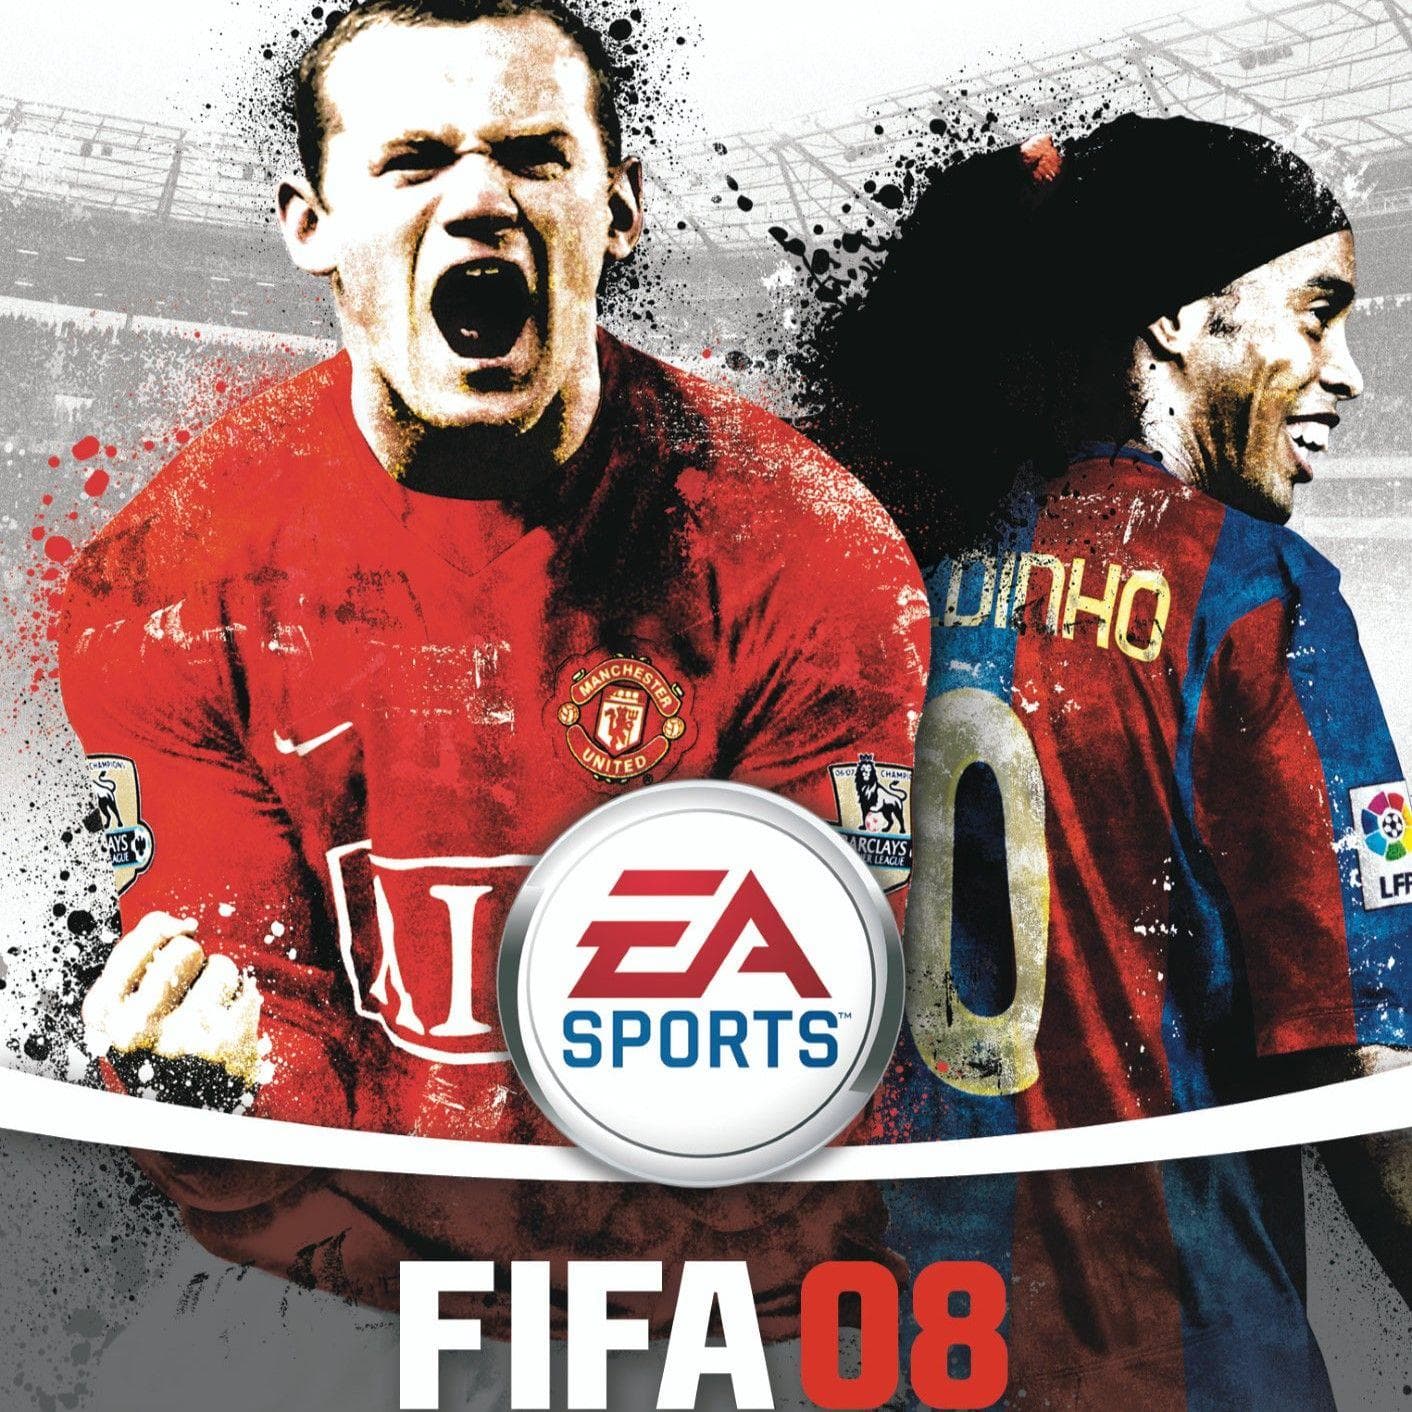 FIFA 08 for ps2 